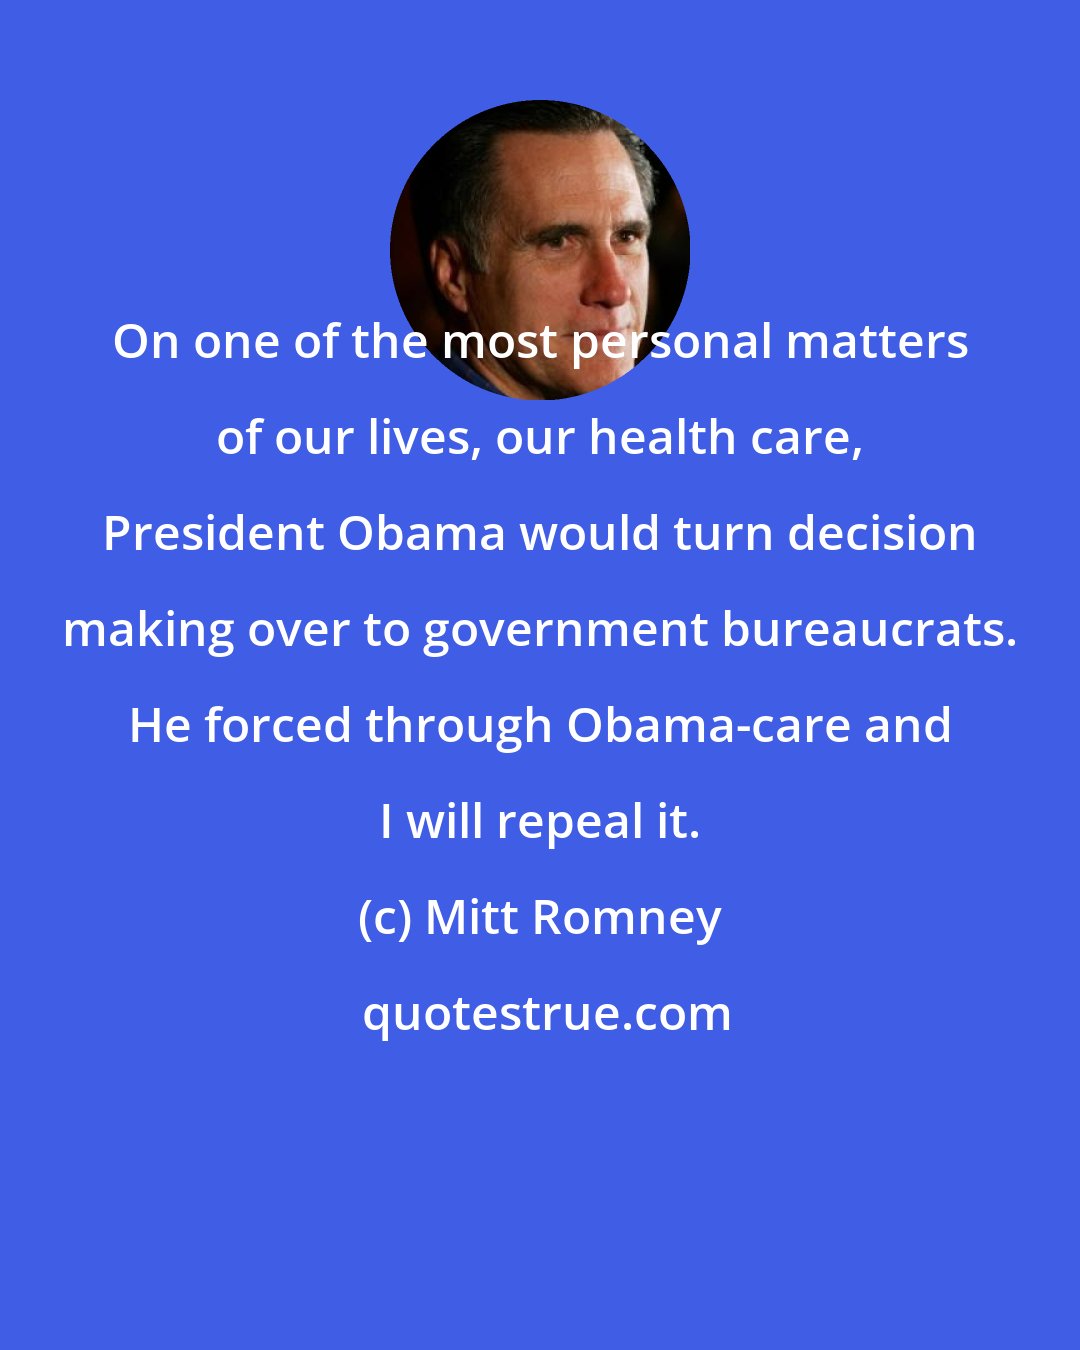 Mitt Romney: On one of the most personal matters of our lives, our health care, President Obama would turn decision making over to government bureaucrats. He forced through Obama-care and I will repeal it.